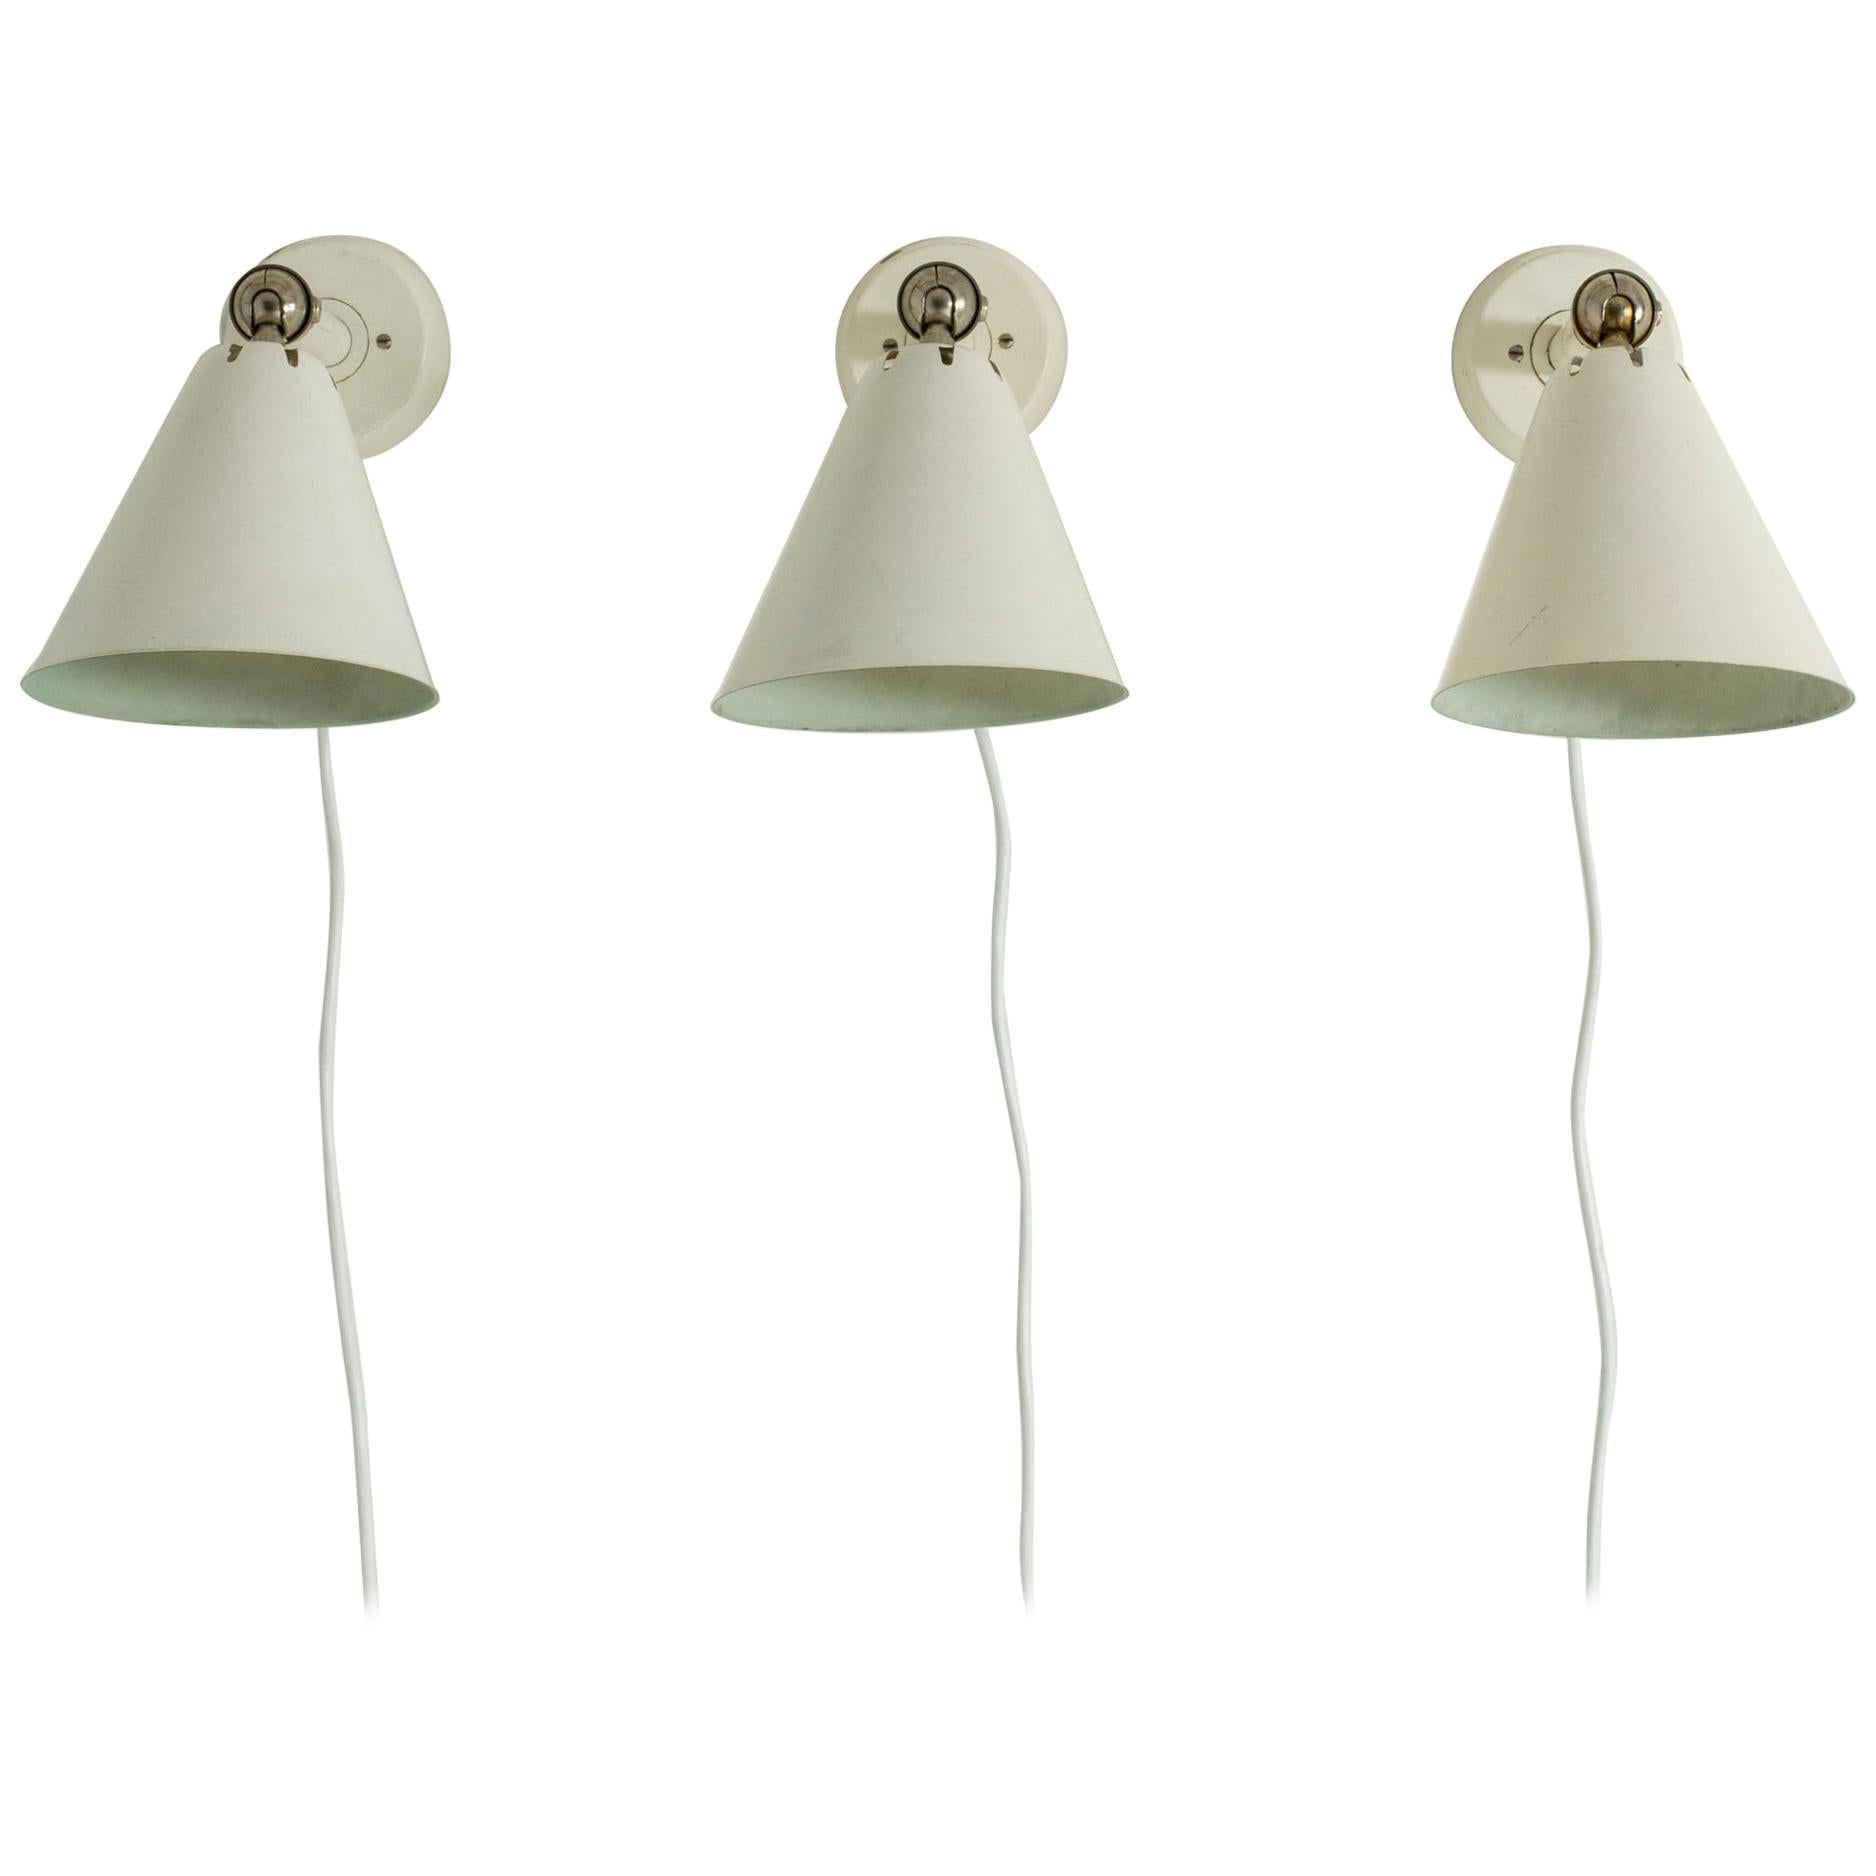 Set of Three Wall Lights from ASEA, Sweden, 1950s